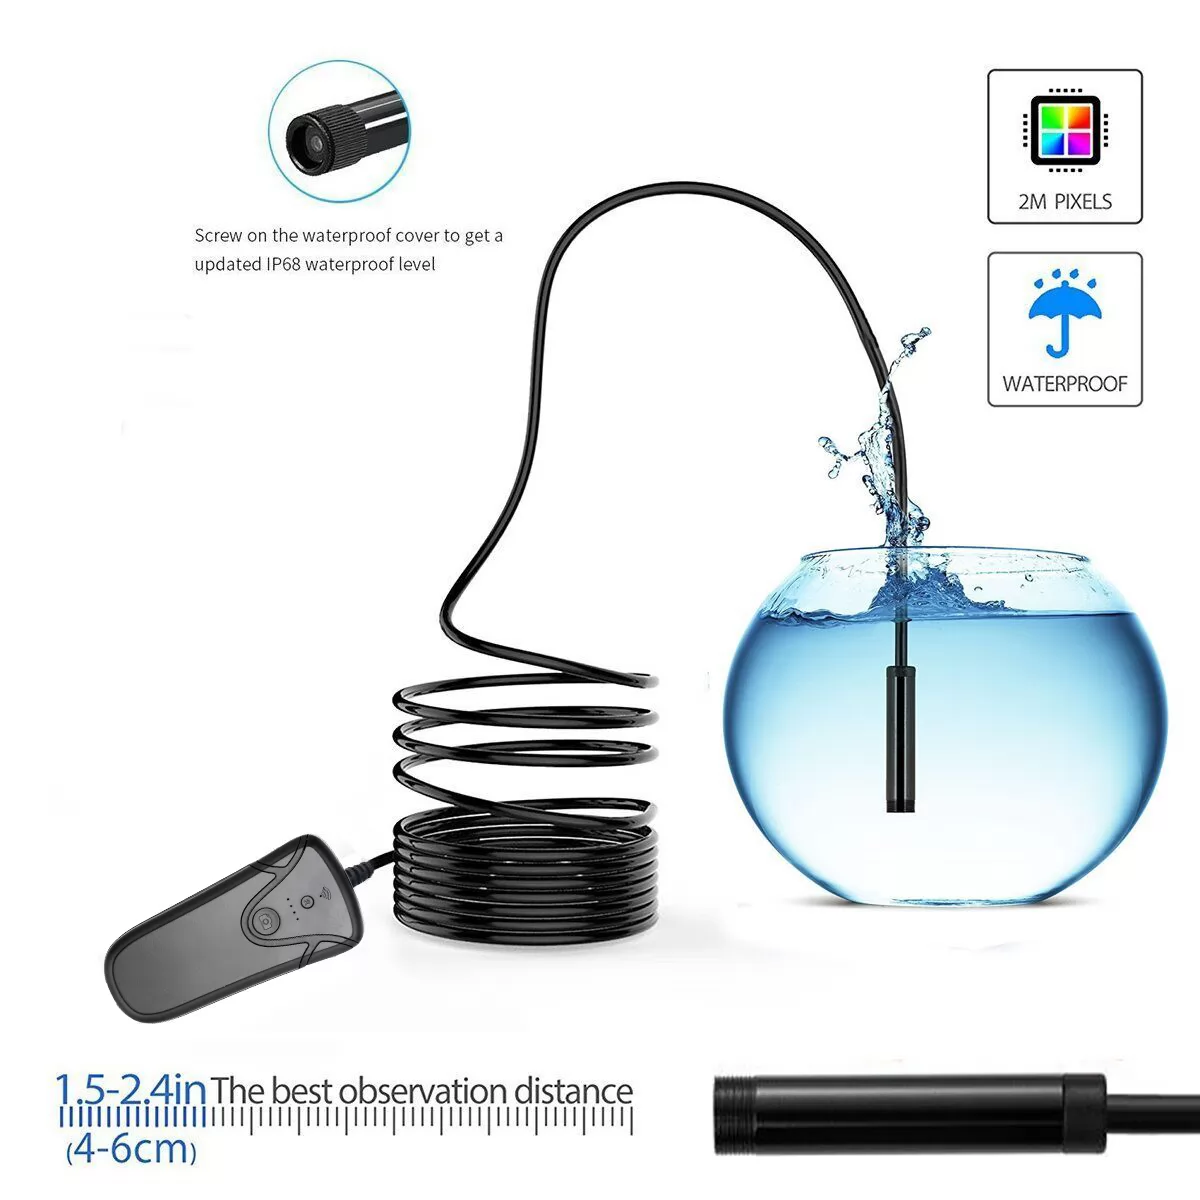 C130 WIFI 5.5MM HD 720P 5M security industrial endoscope camera system wireless